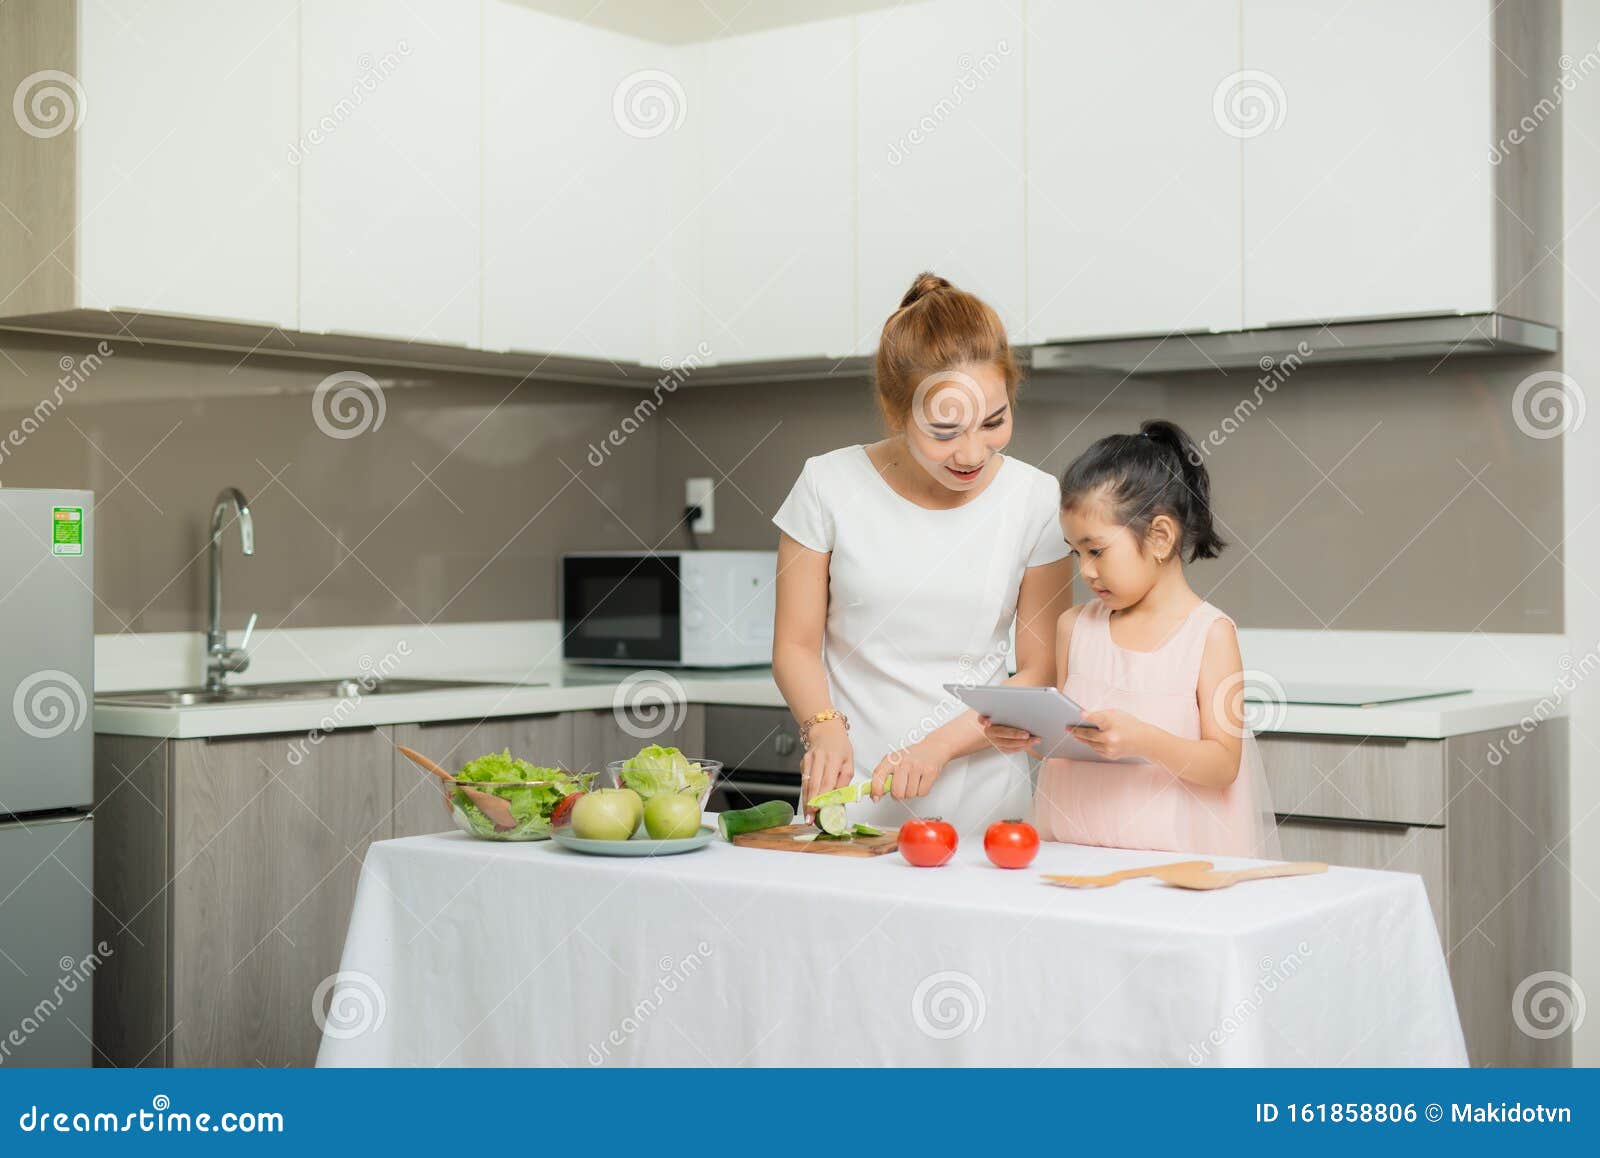 mother and child and computer use, invented a food menu